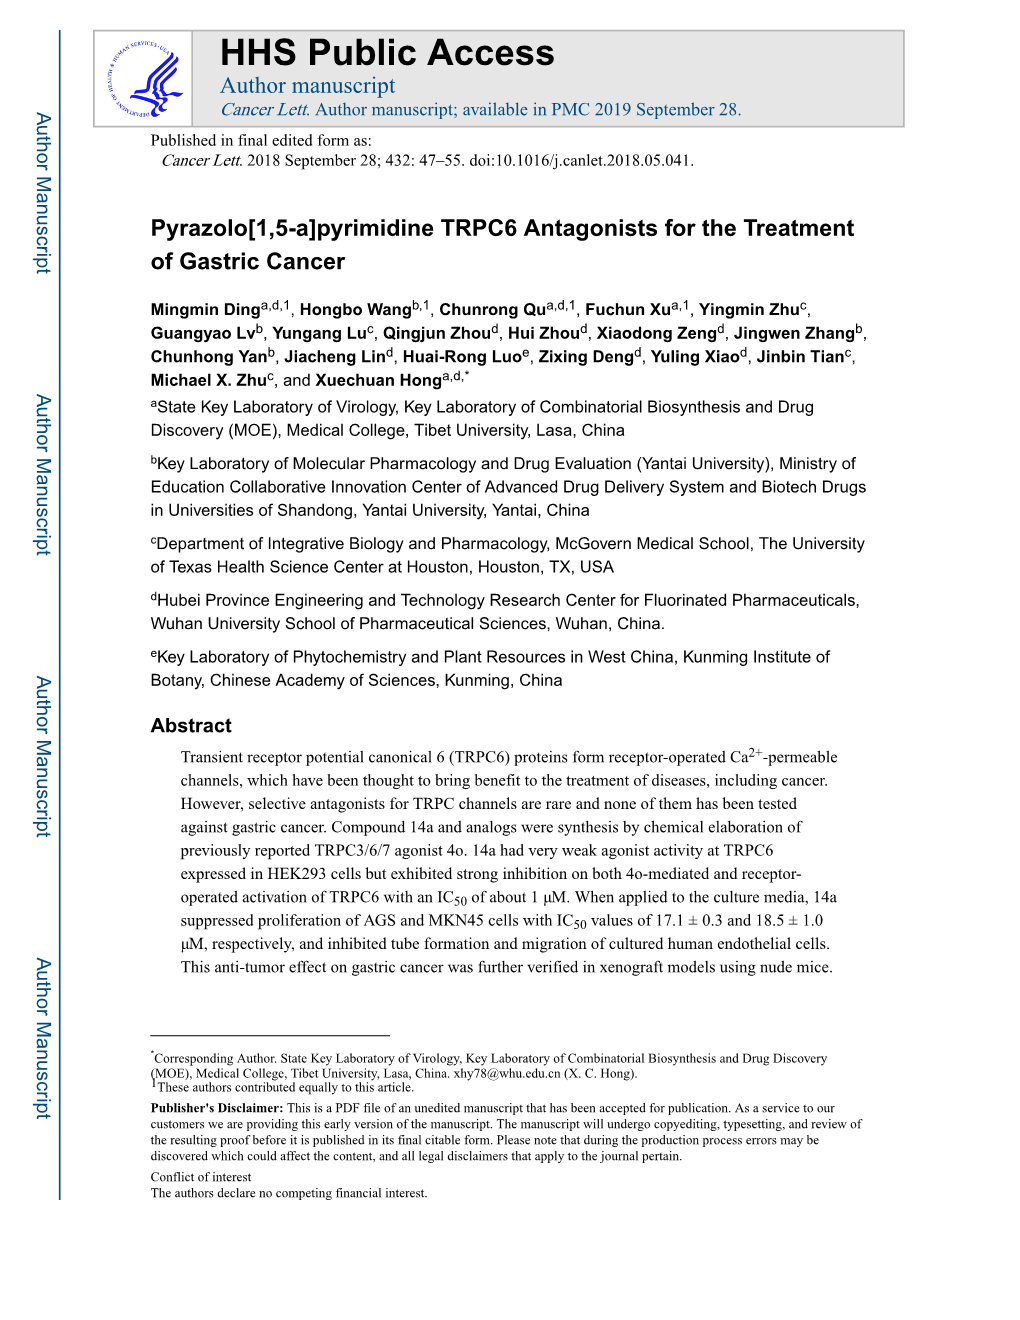 Pyrimidine TRPC6 Antagonists for the Treatment of Gastric Cancer